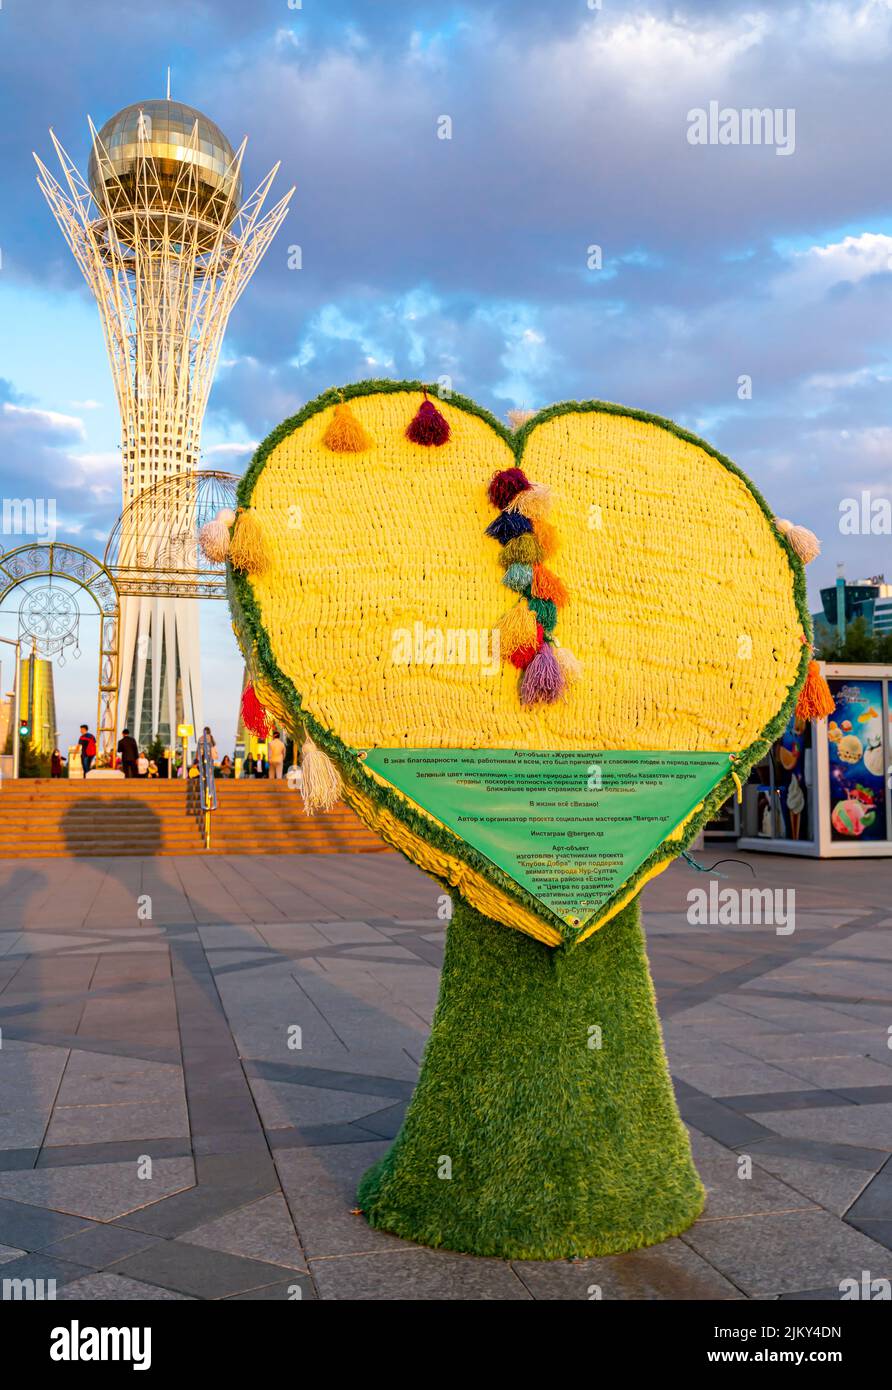 Art object Zhurek Zheluy in the form of heart symbolizing the transition to green city of Nur-Sultan, commissioned by the city government. Kazakhstan Stock Photo